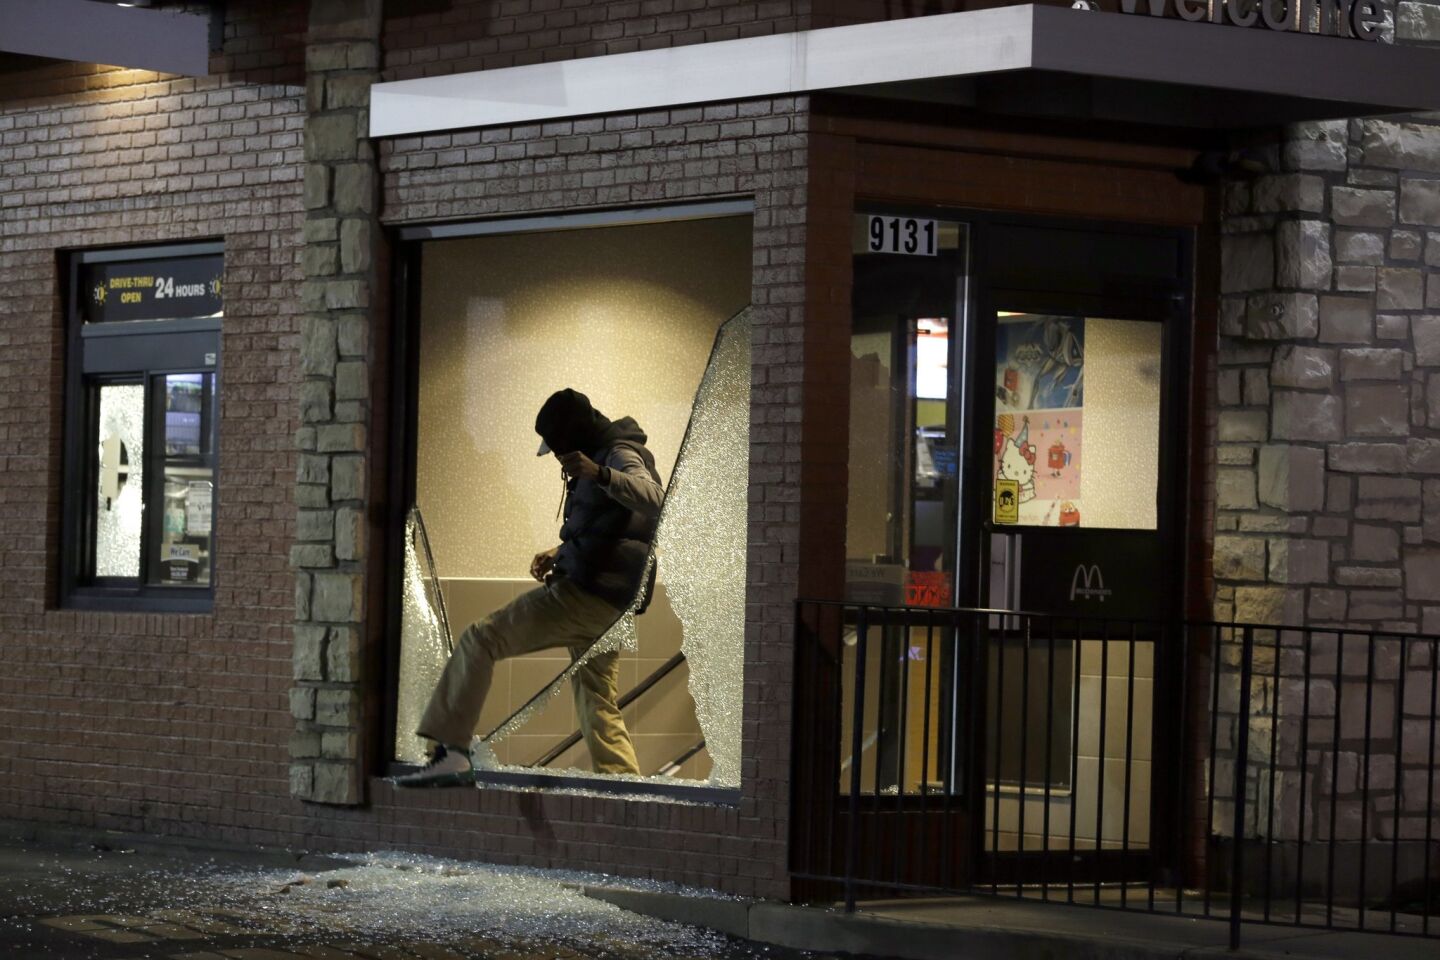 A man steps out of a vandalized McDonald's restaurant in Ferguson, Mo., after the grand jury decision was announced.